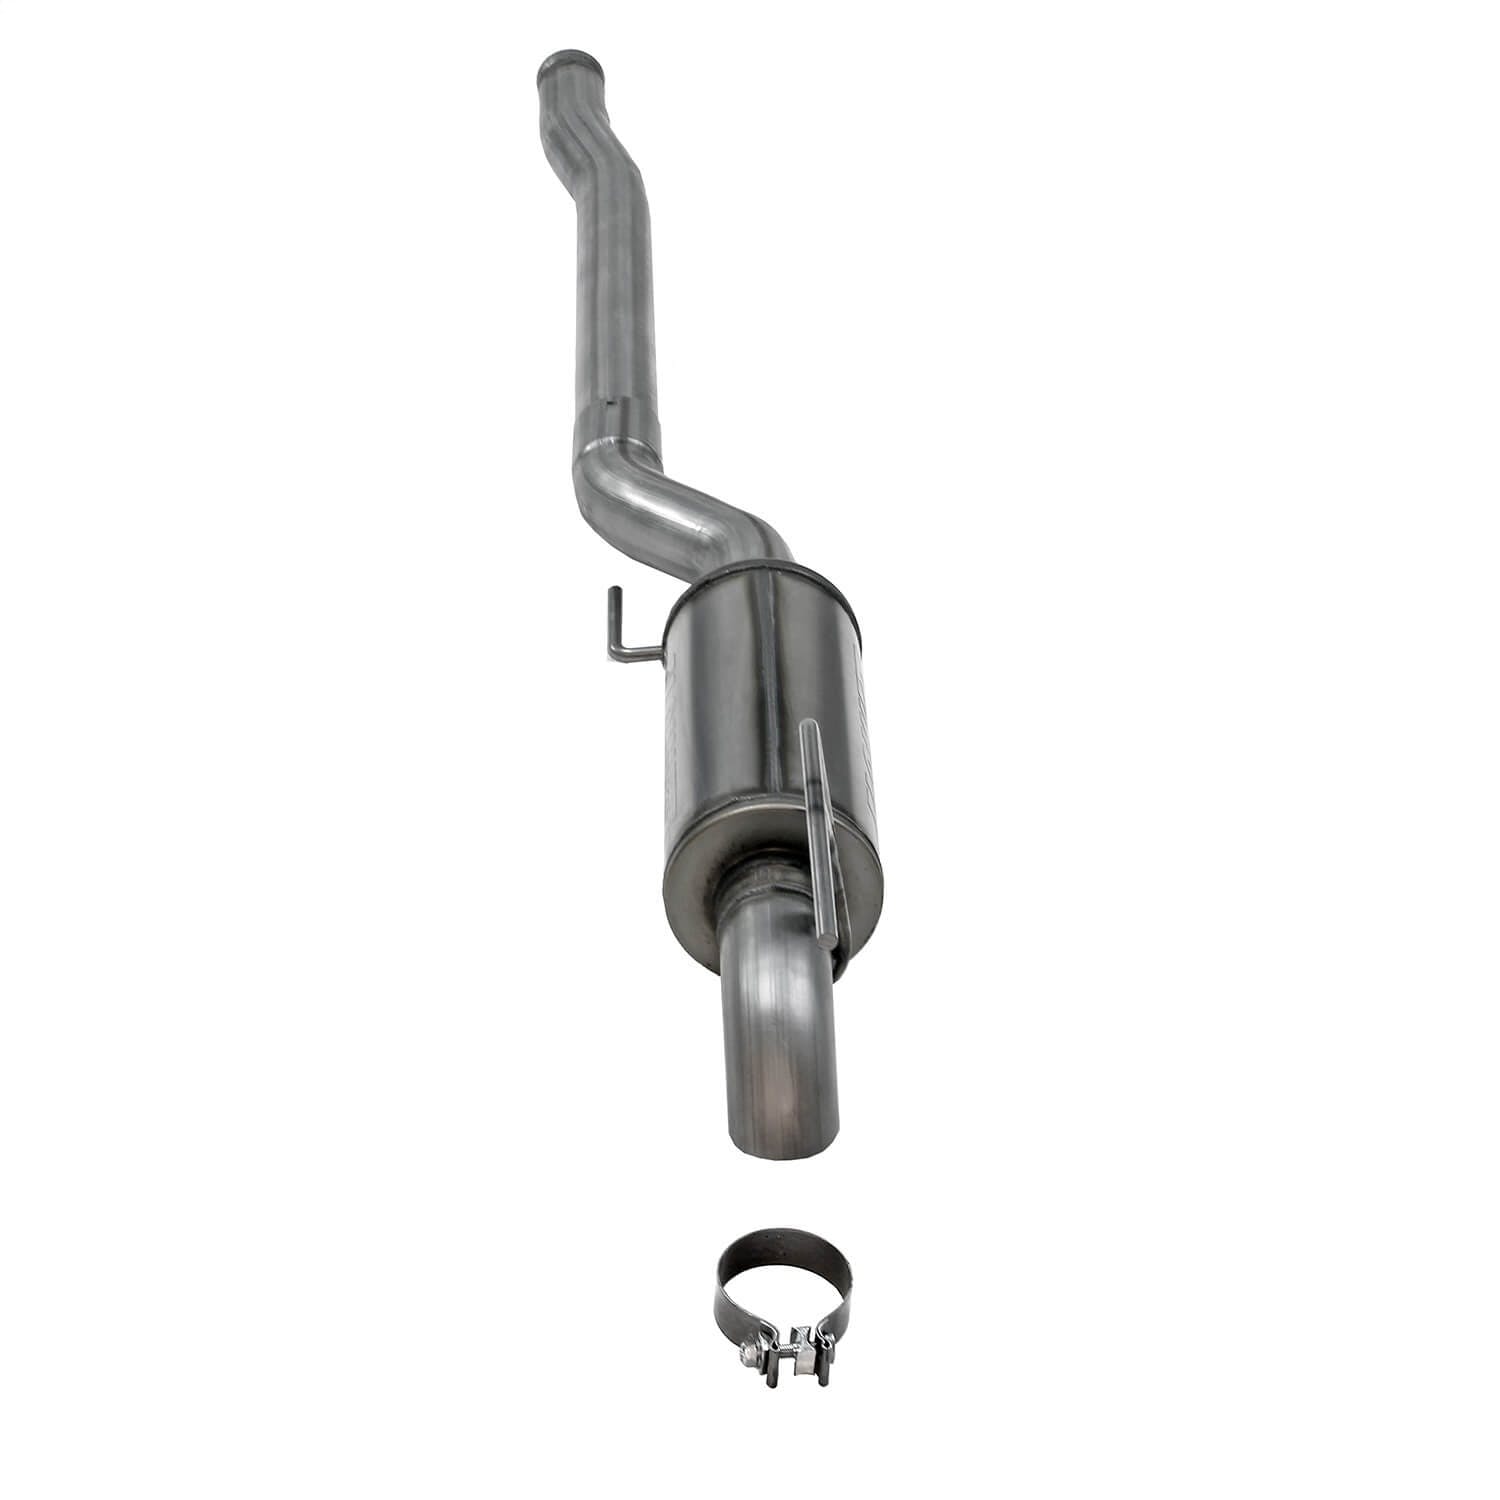 Flowmaster 717969 FlowFX Extreme Cat-Back Exhaust System